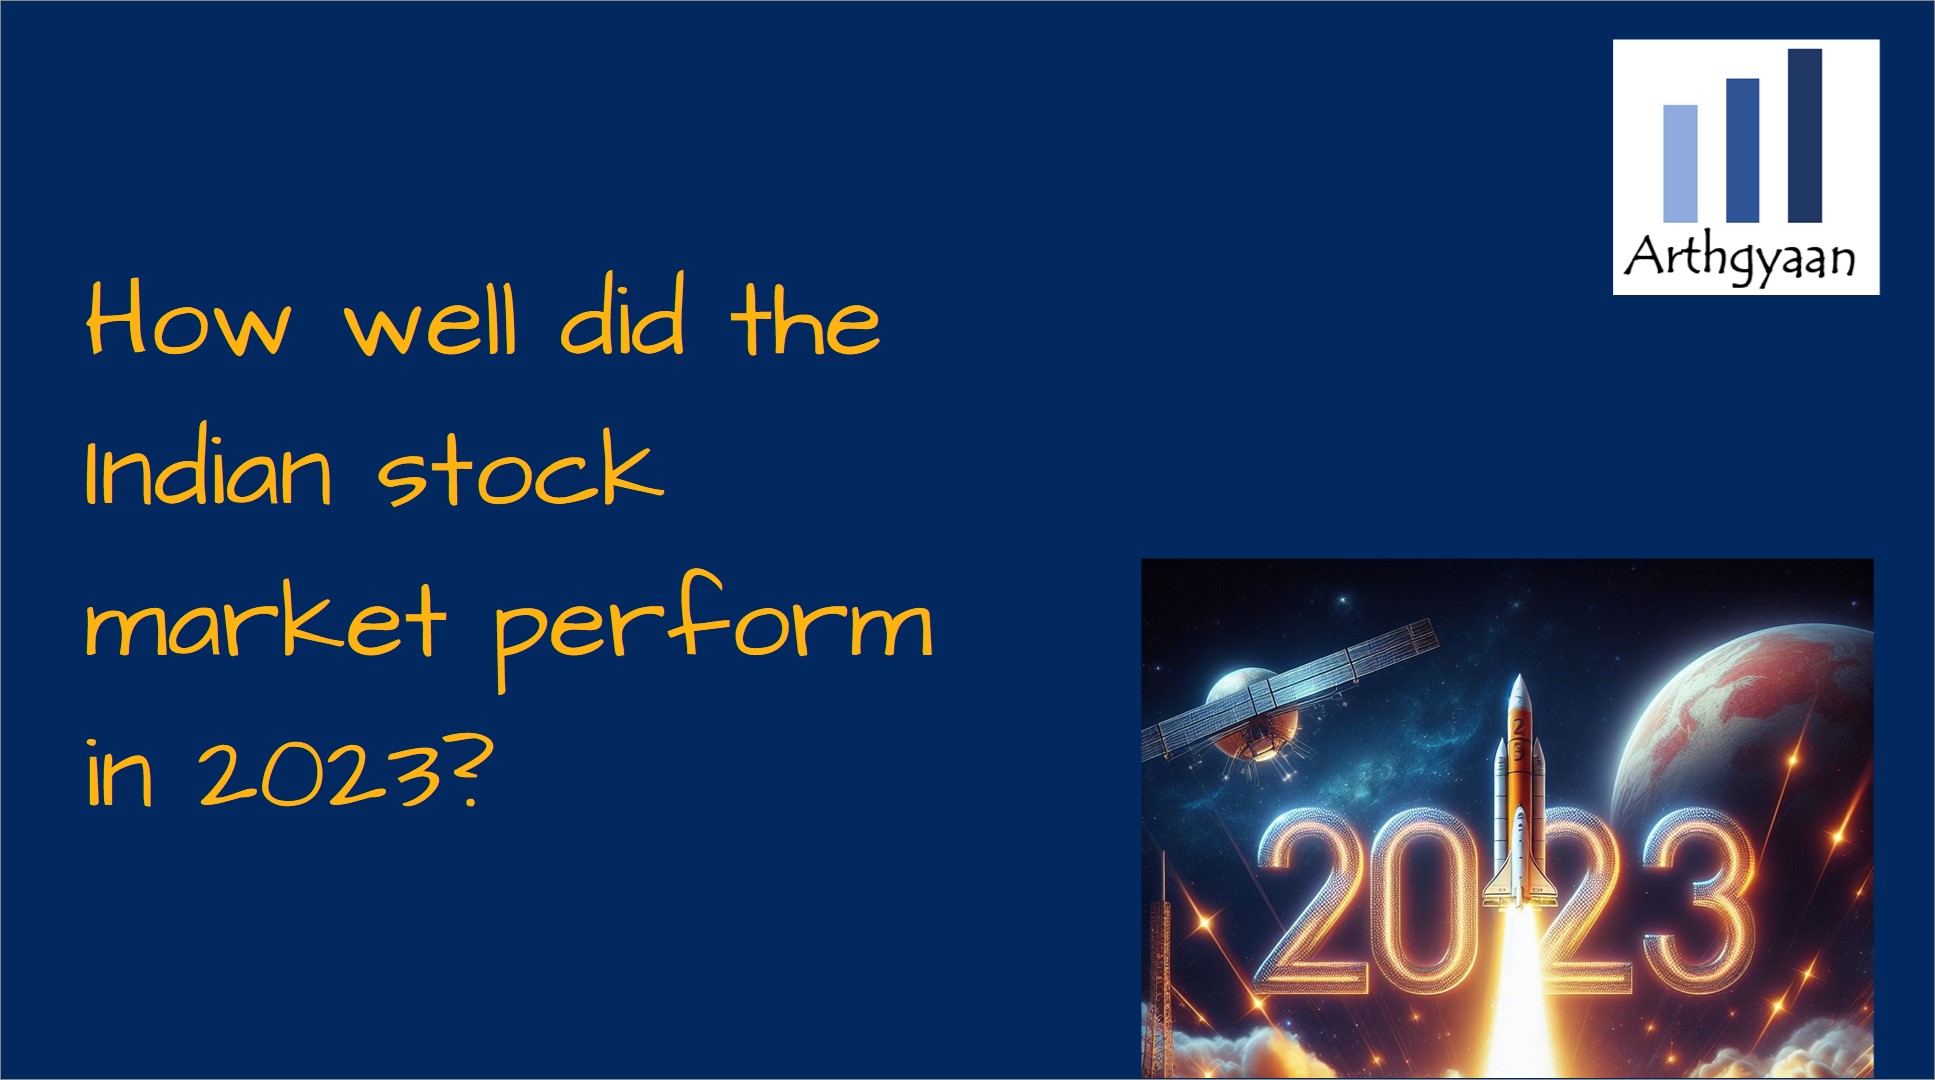 How well did the Indian stock market perform in 2023?